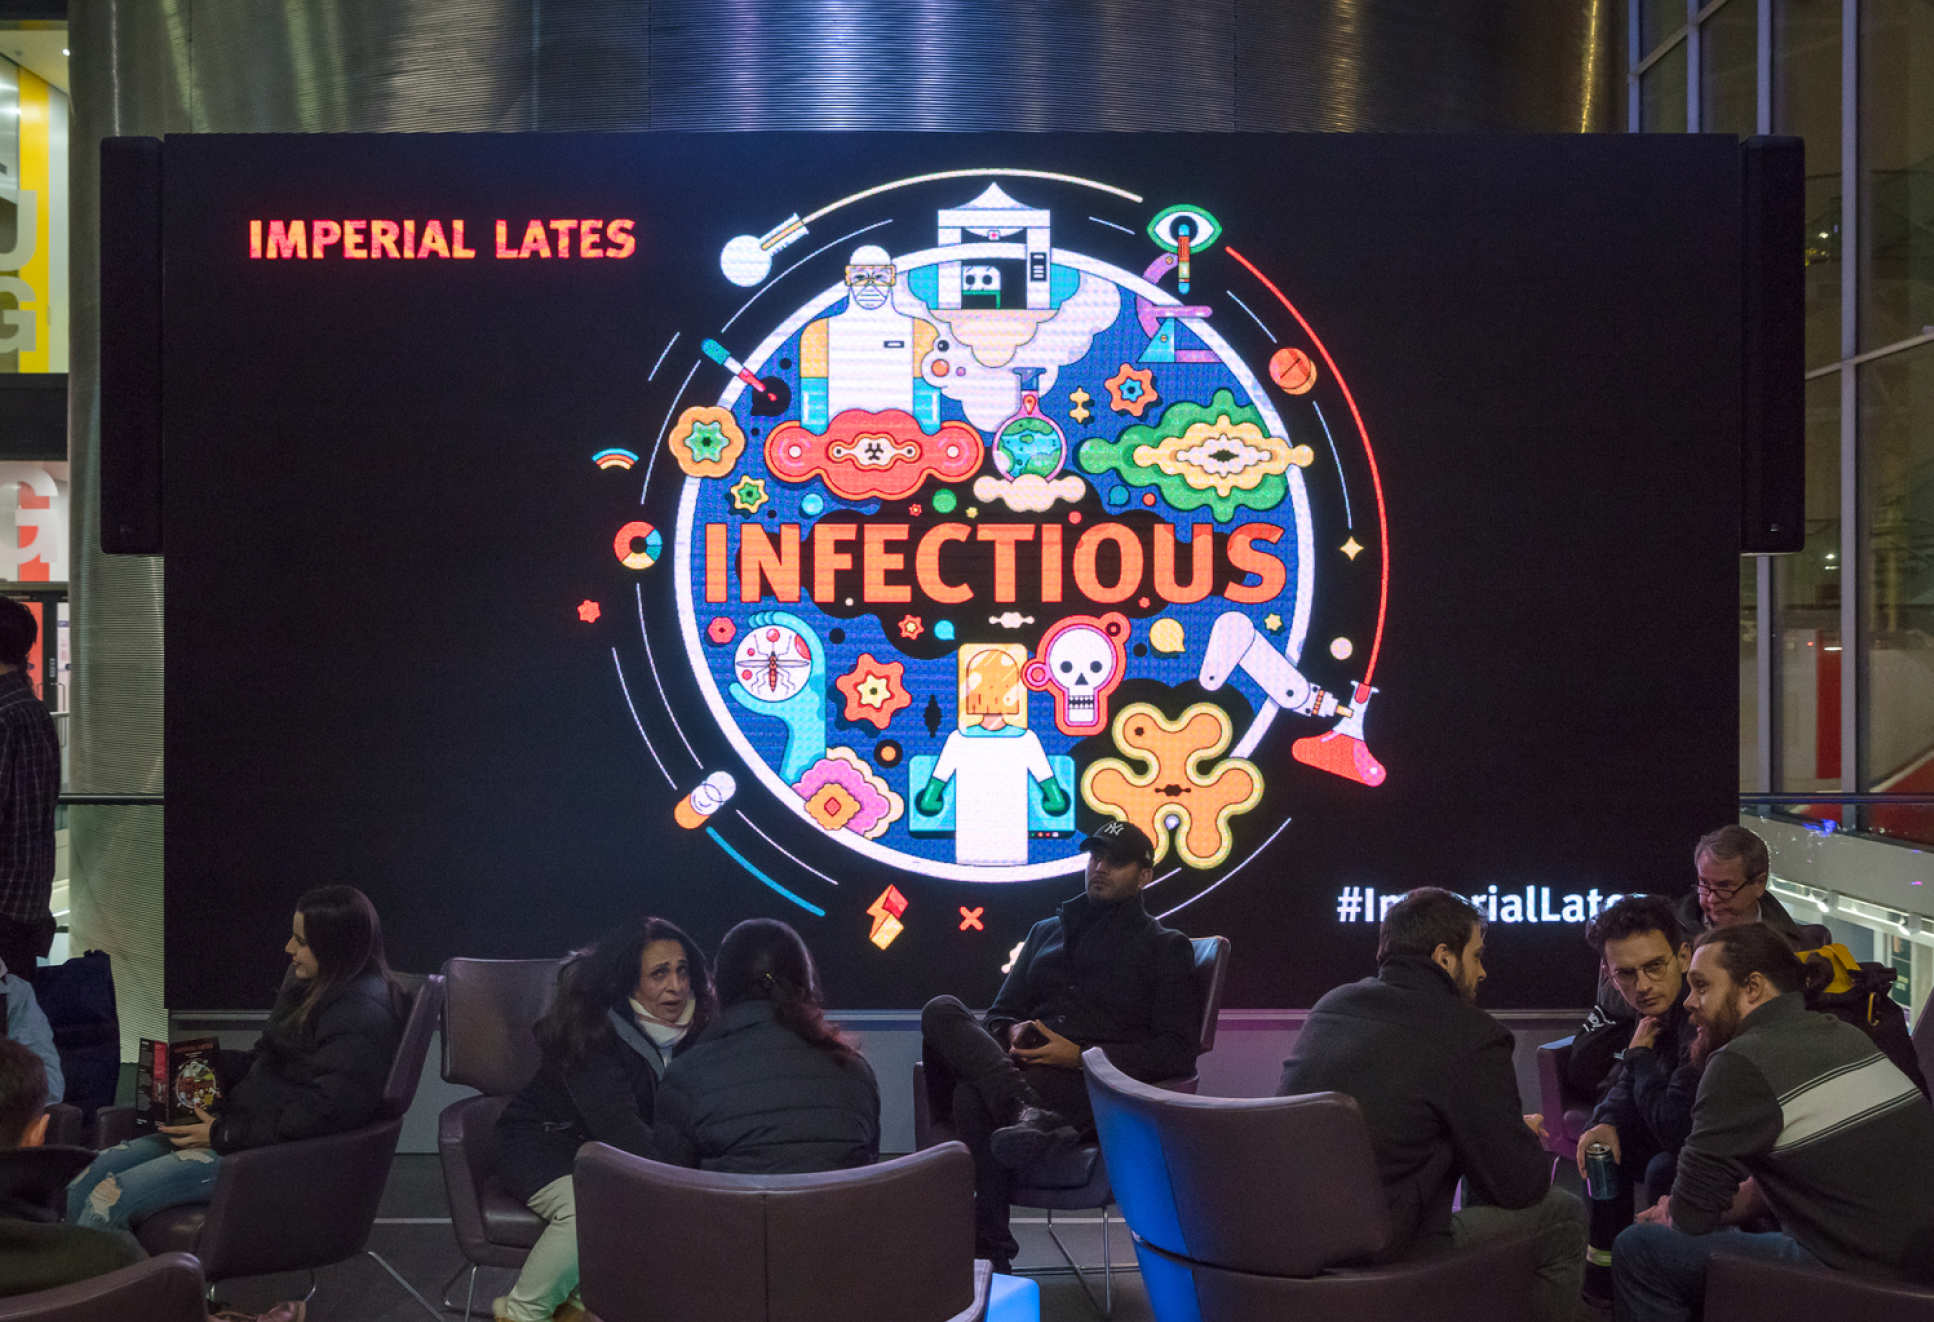 The Imperial Lates: Infectious logo on a big screen in the College's main entrance